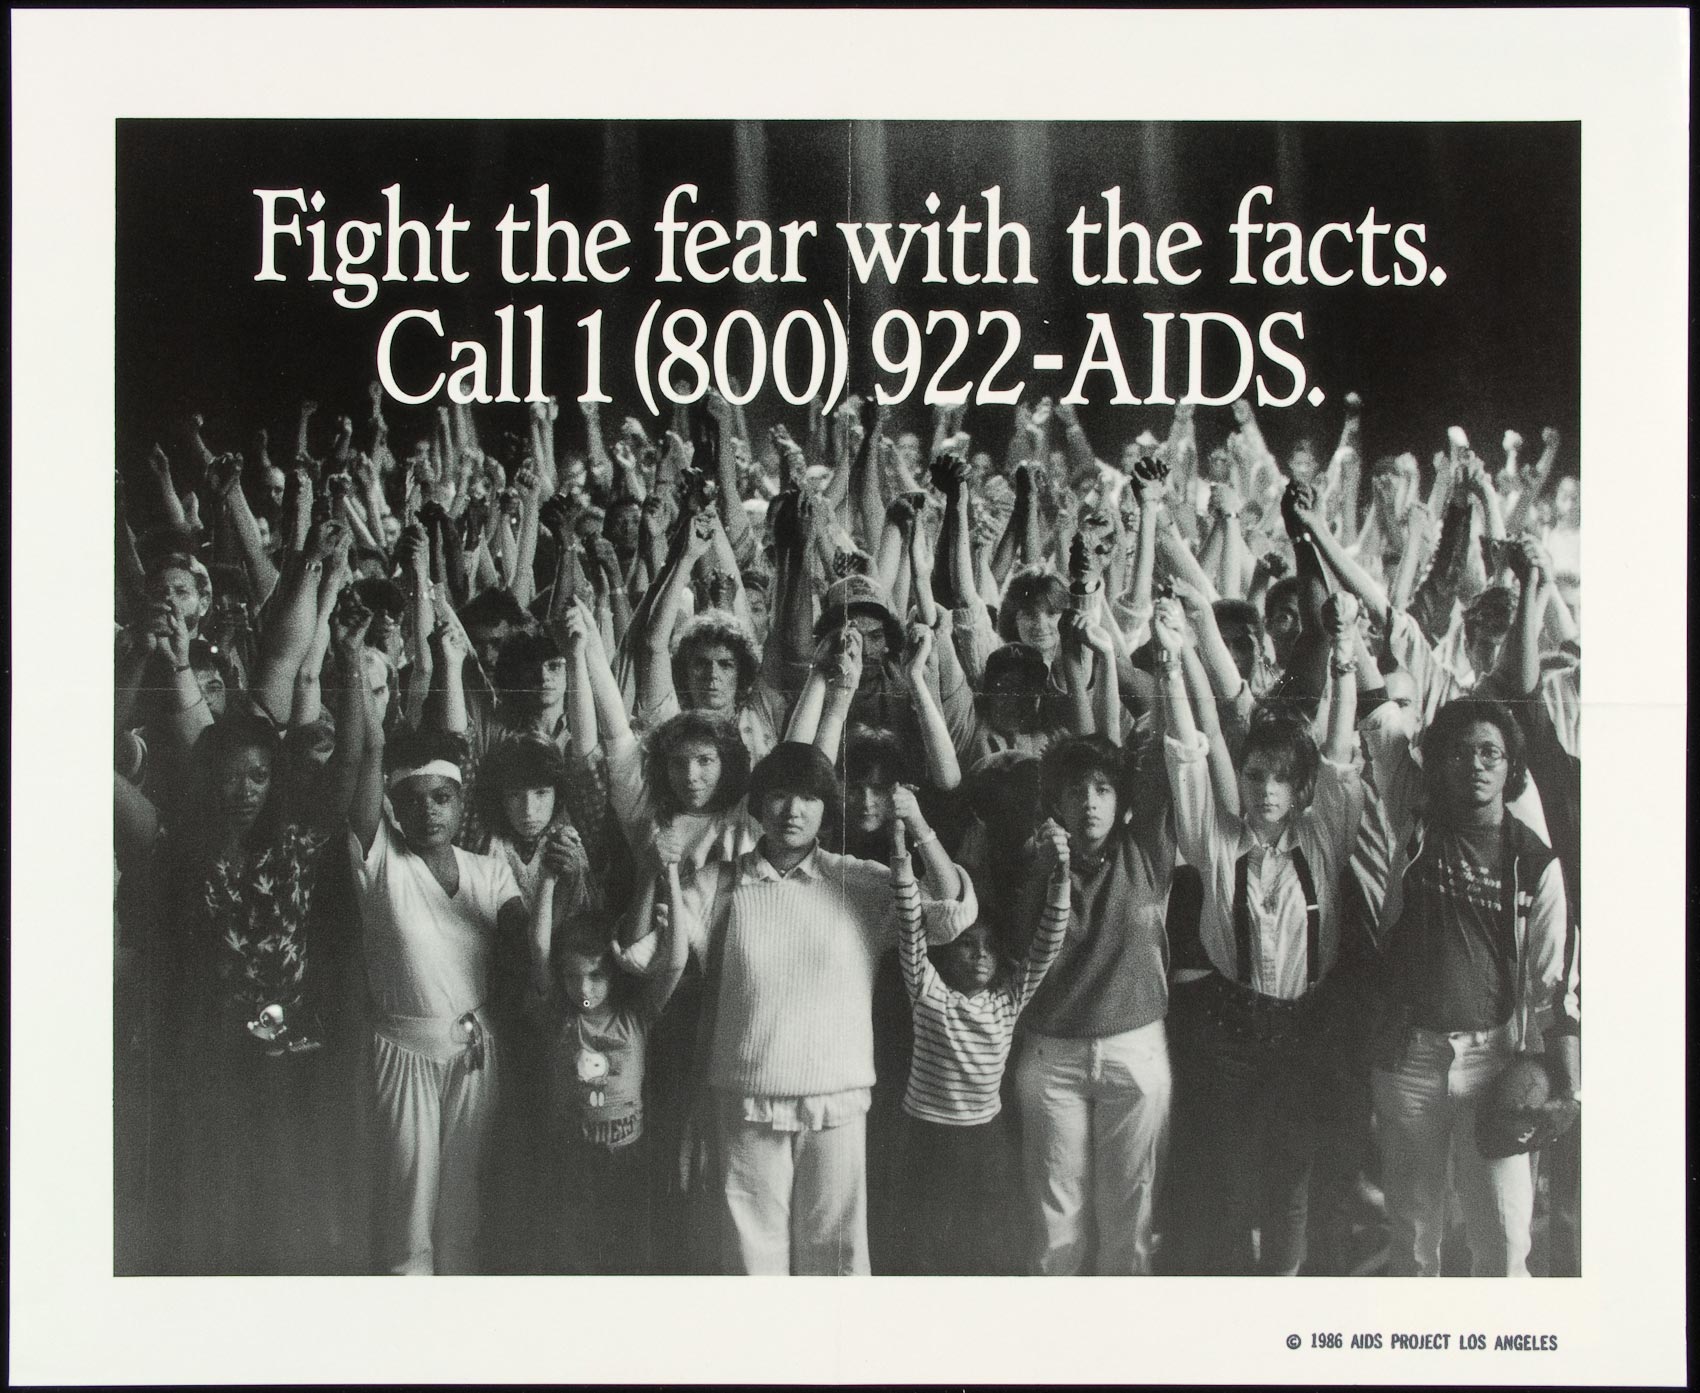 1986 AIDS Education Poster - Facts